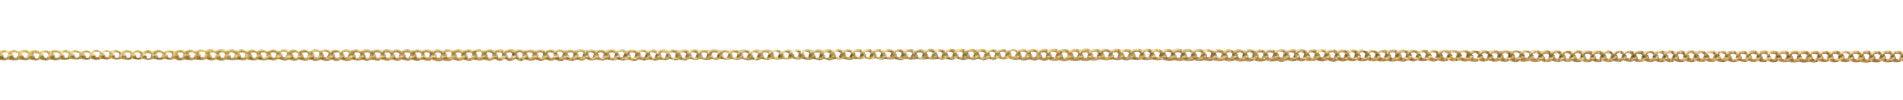 Thin Gold Plated Chain with Clasp (Multiple Sizes) - Saint-Mike.org